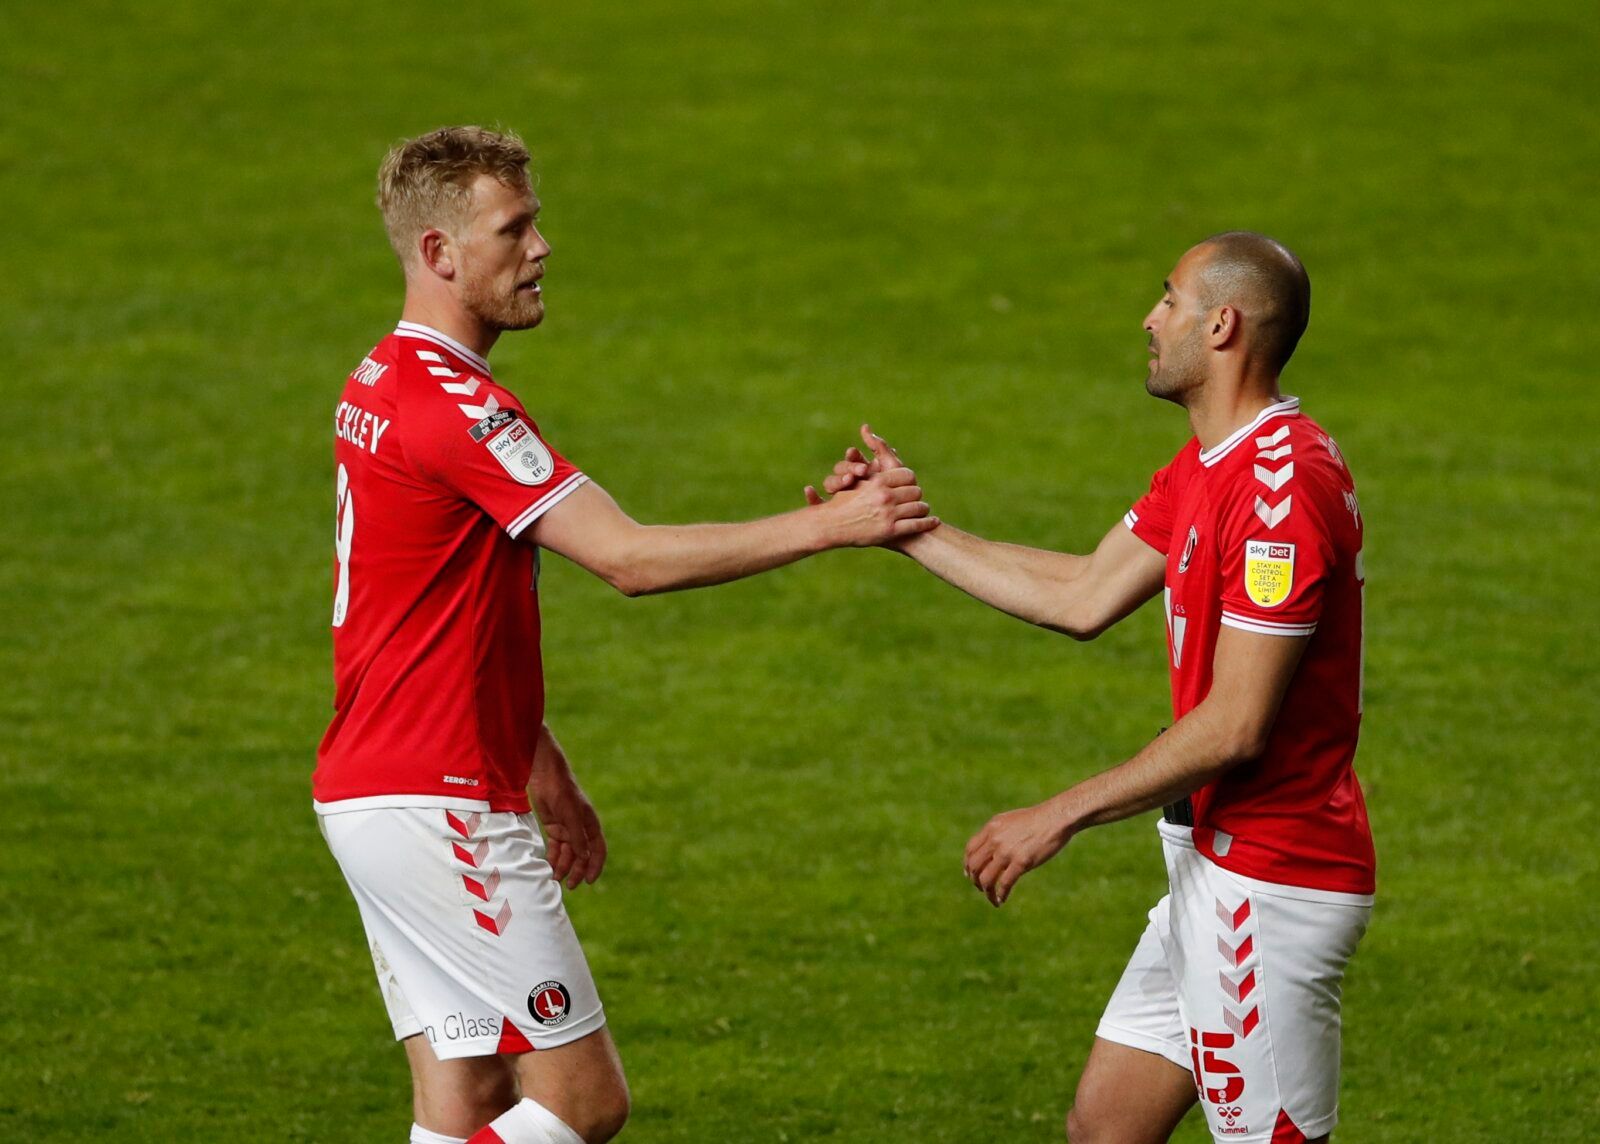 Soccer Football - League One - Charlton Athletic v Lincoln City - The Valley, London, Britain - May 4, 2021 Charlton Athletic's Jayden Stockley and Darren Pratley celebrate after the match Action Images/Andrew Couldridge EDITORIAL USE ONLY. No use with unauthorized audio, video, data, fixture lists, club/league logos or 'live' services. Online in-match use limited to 75 images, no video emulation. No use in betting, games or single club /league/player publications.  Please contact your account r